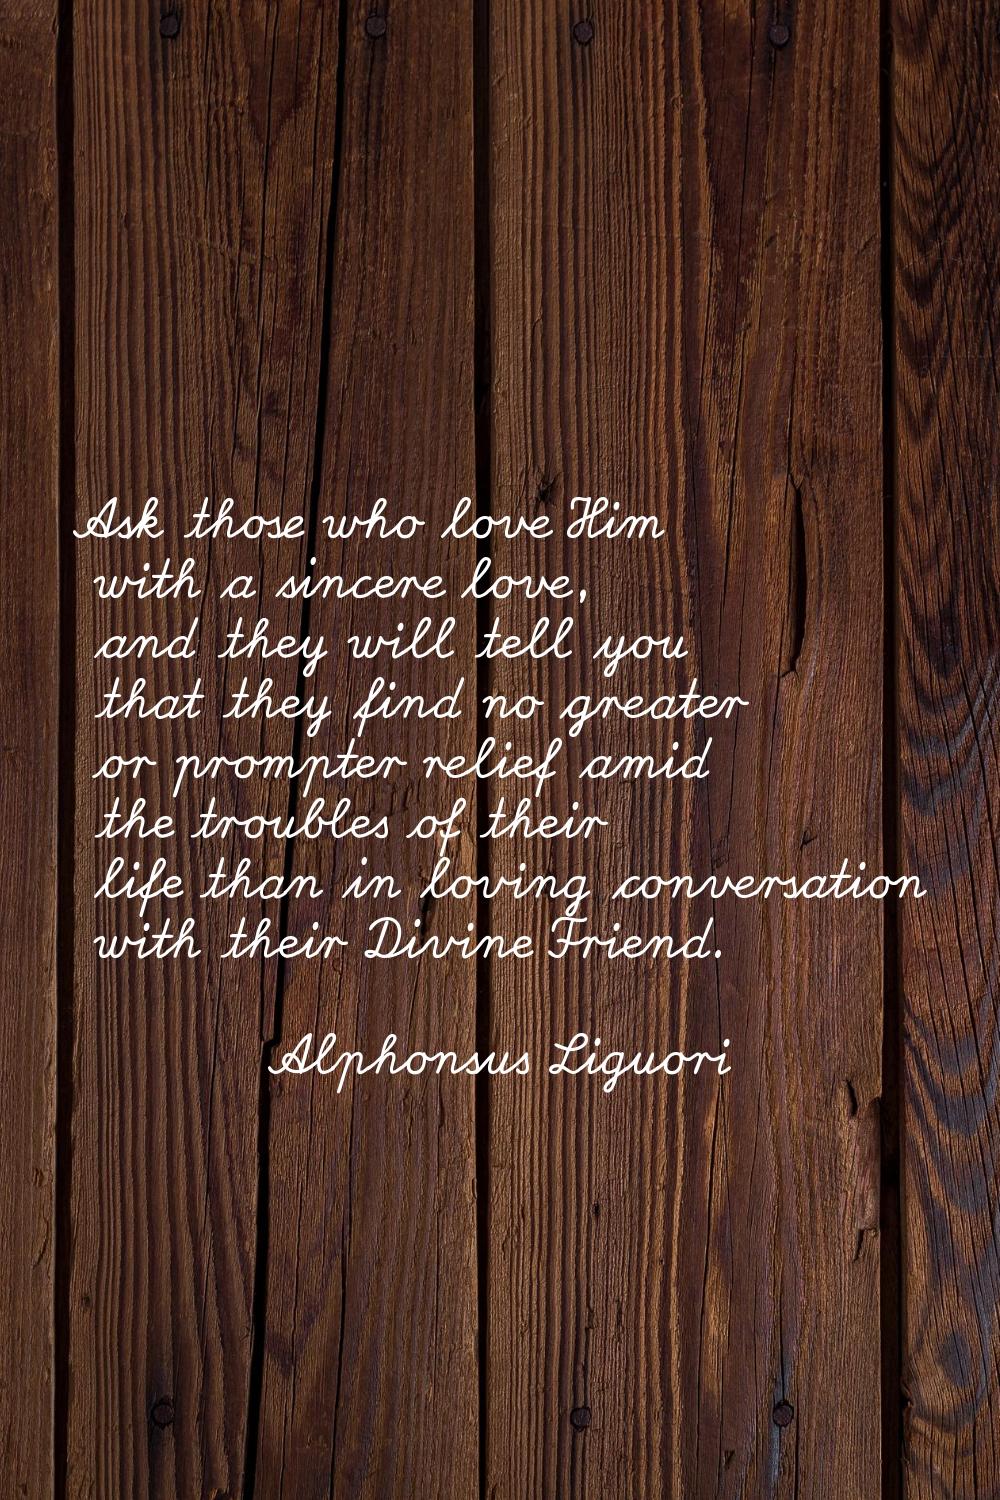 Ask those who love Him with a sincere love, and they will tell you that they find no greater or pro